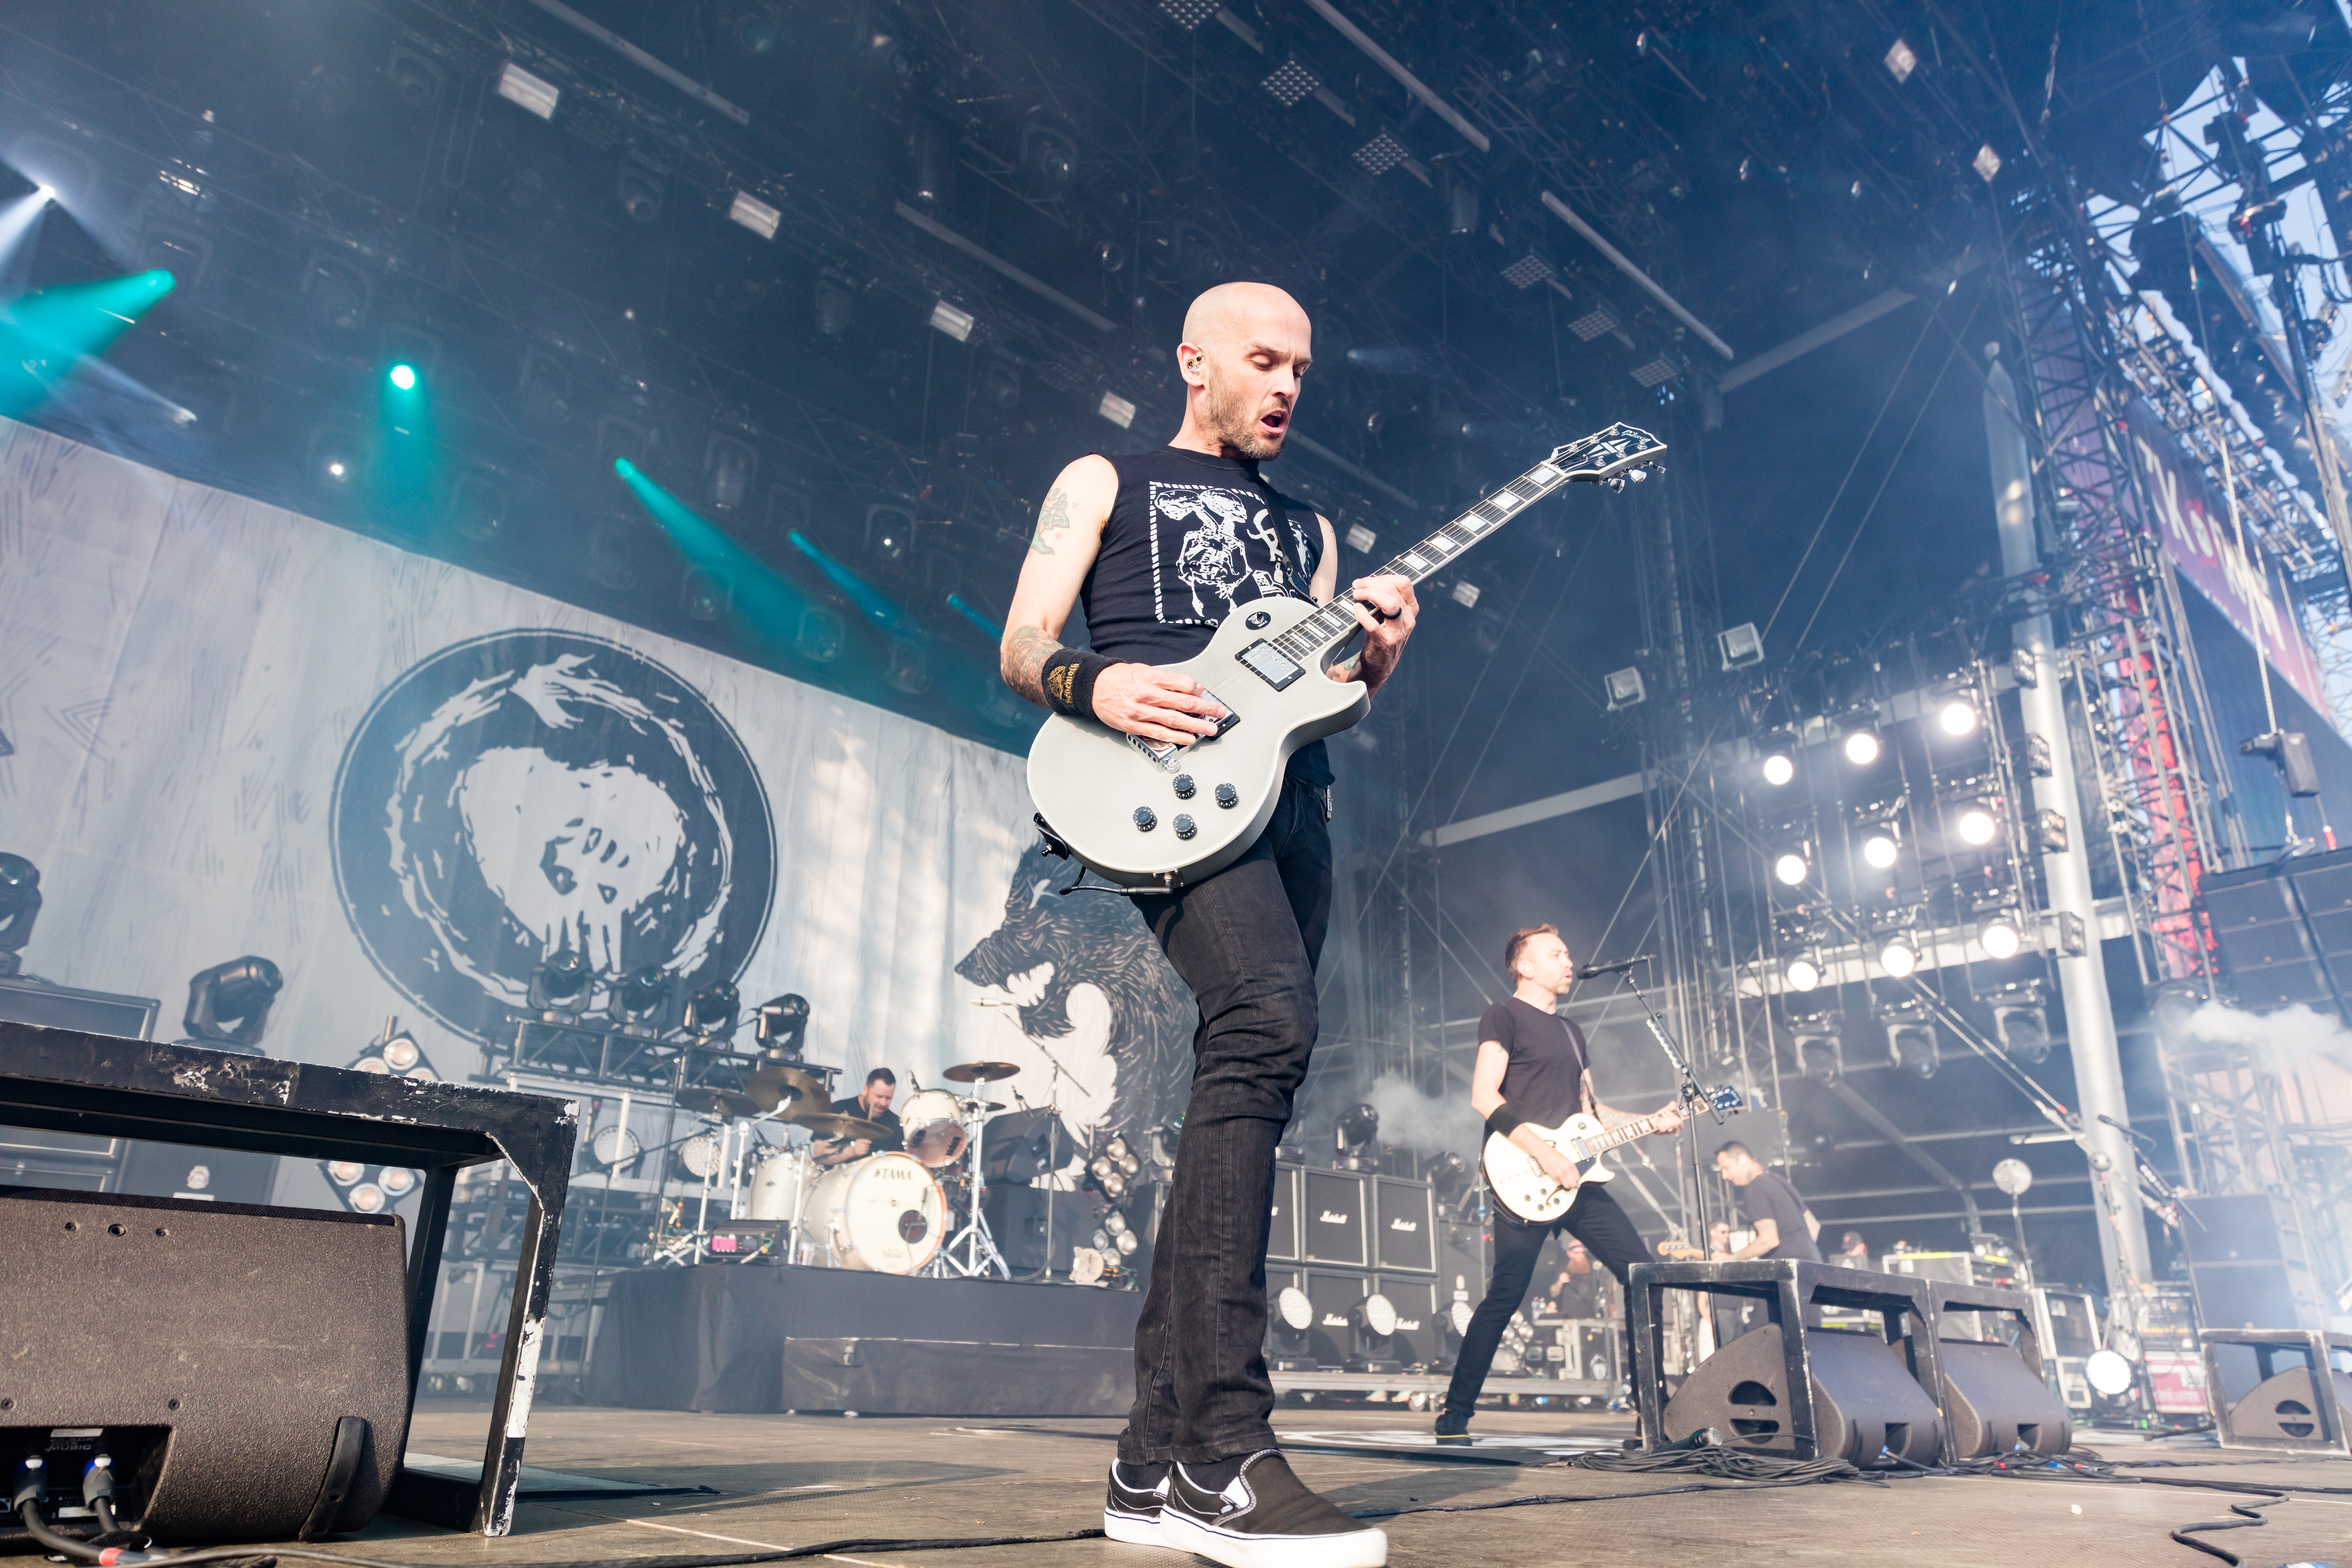 File:Rise Against - 2018154192713 2018-06-03 Rock am Ring - 5DS R - 0100 -  5DSR6420.jpg - Wikimedia Commons